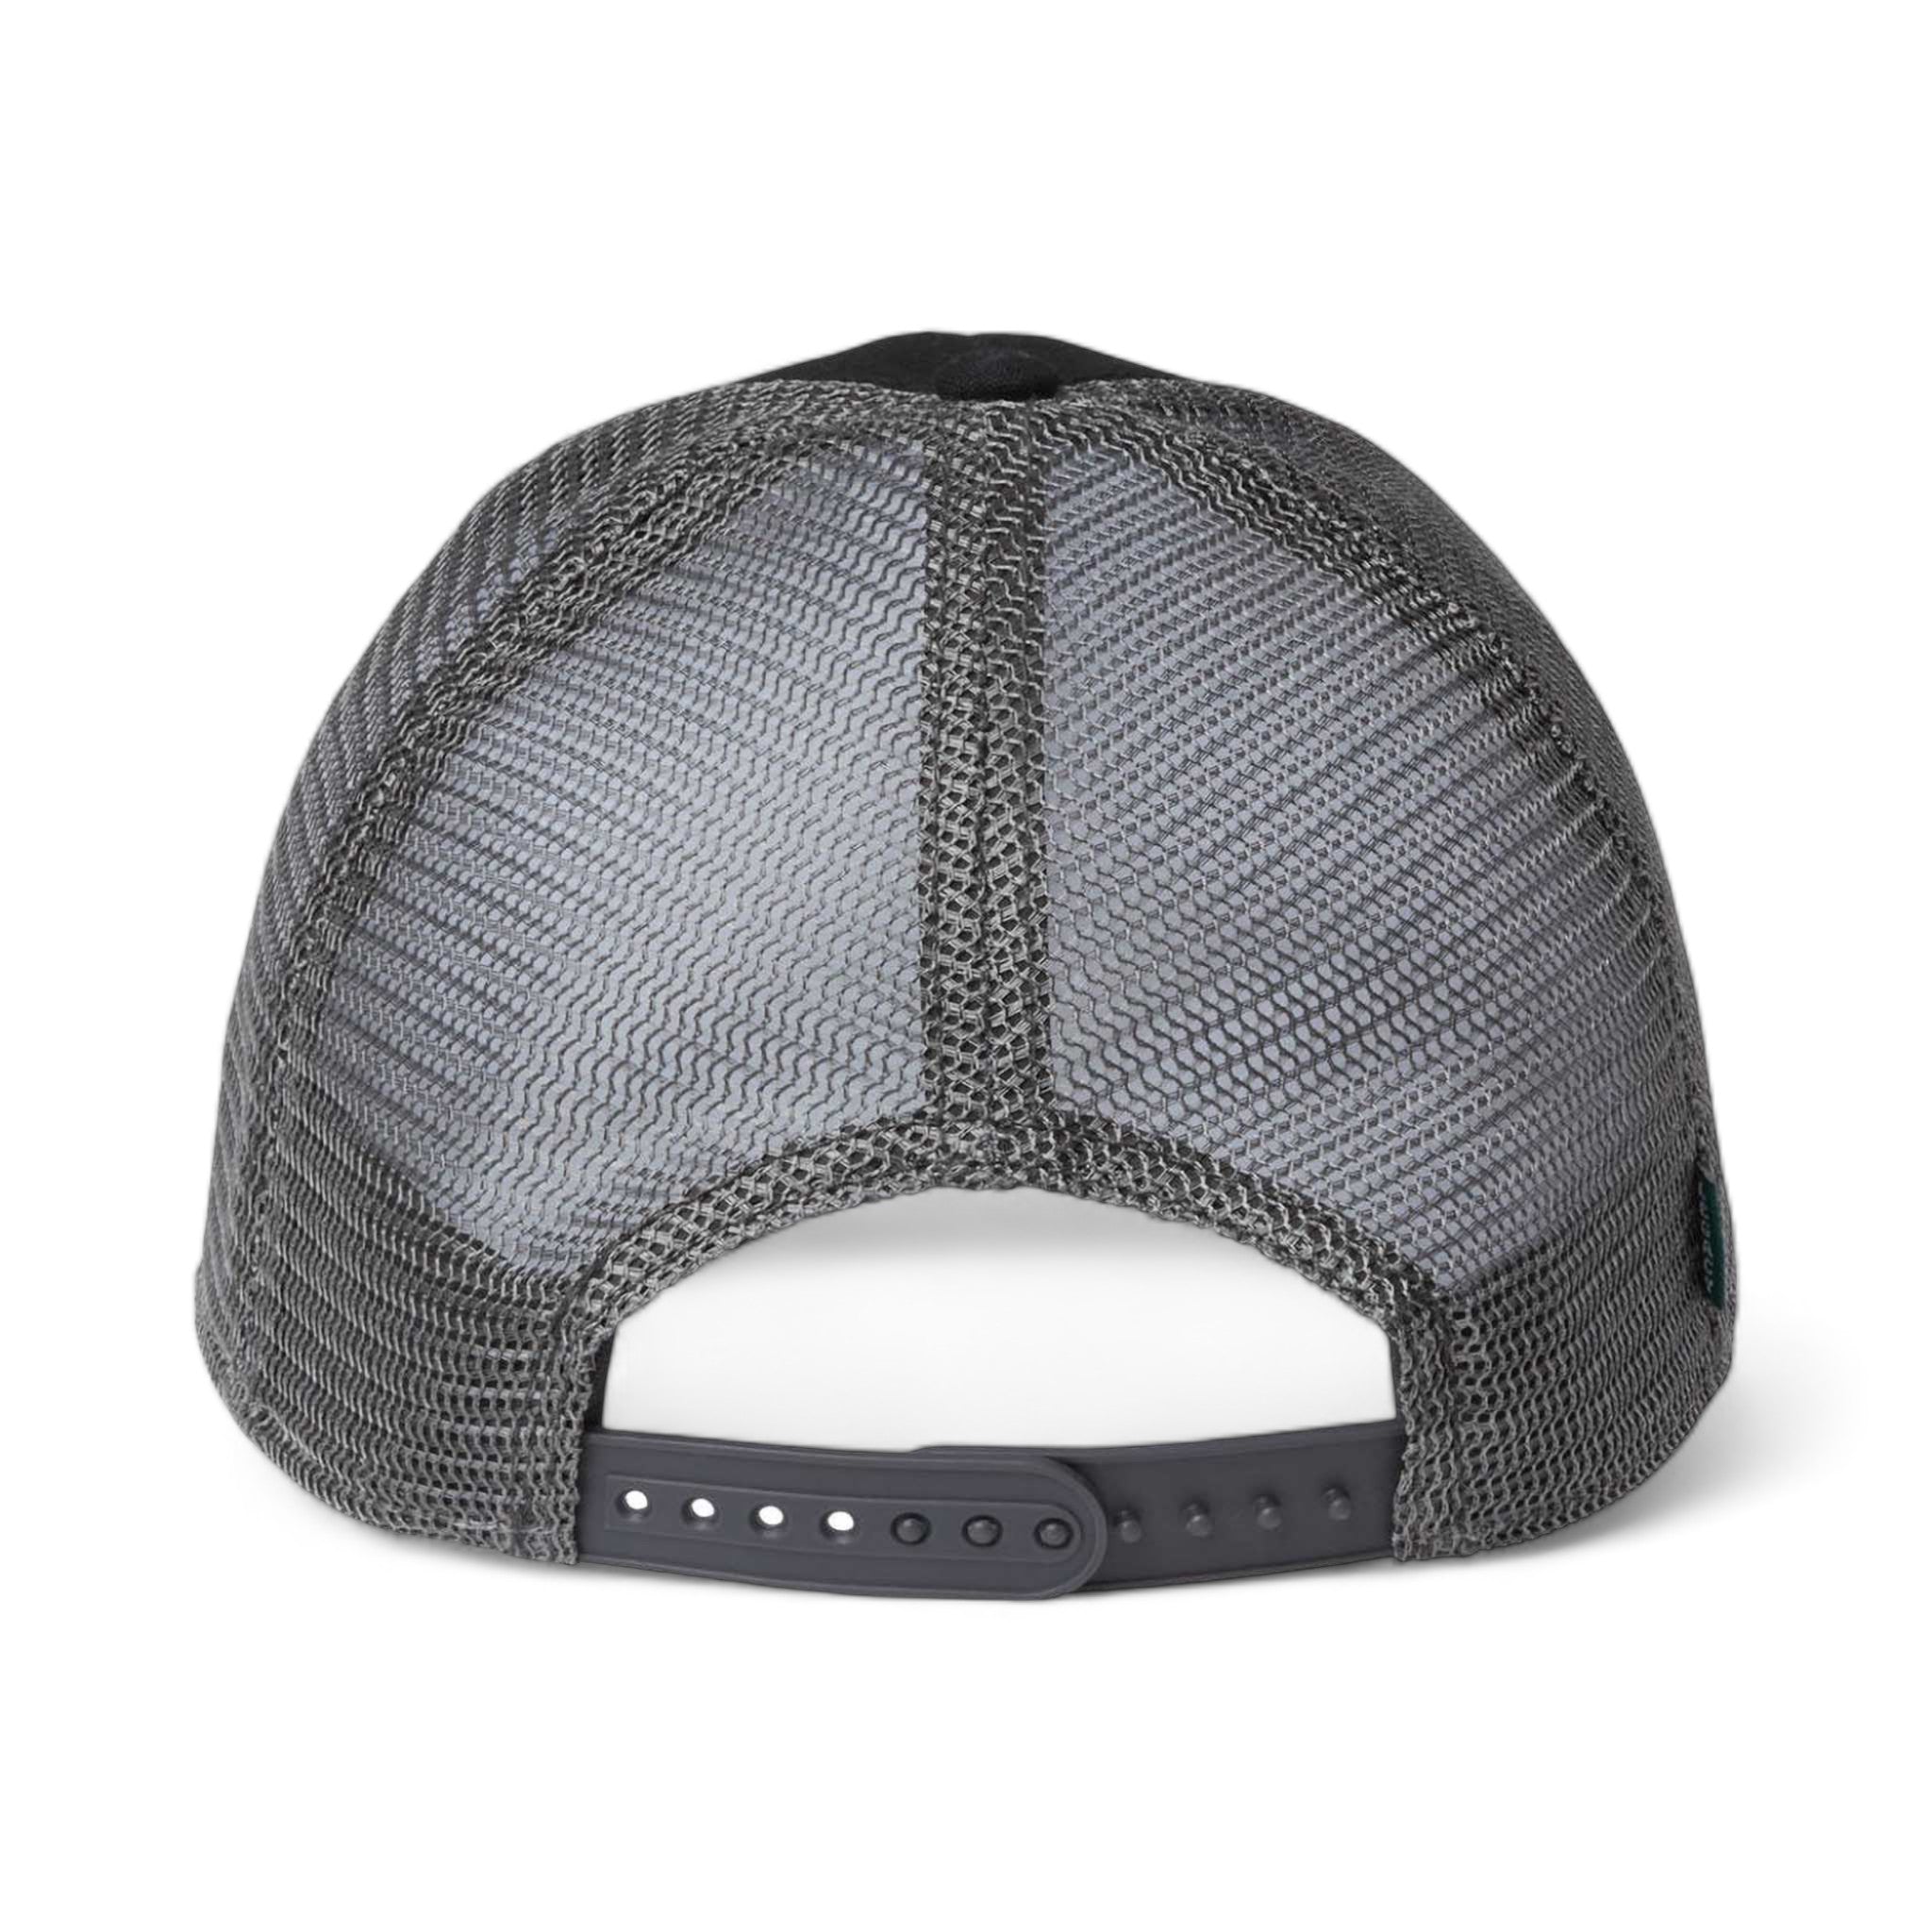 Back view of LEGACY LPS custom hat in black and dark grey